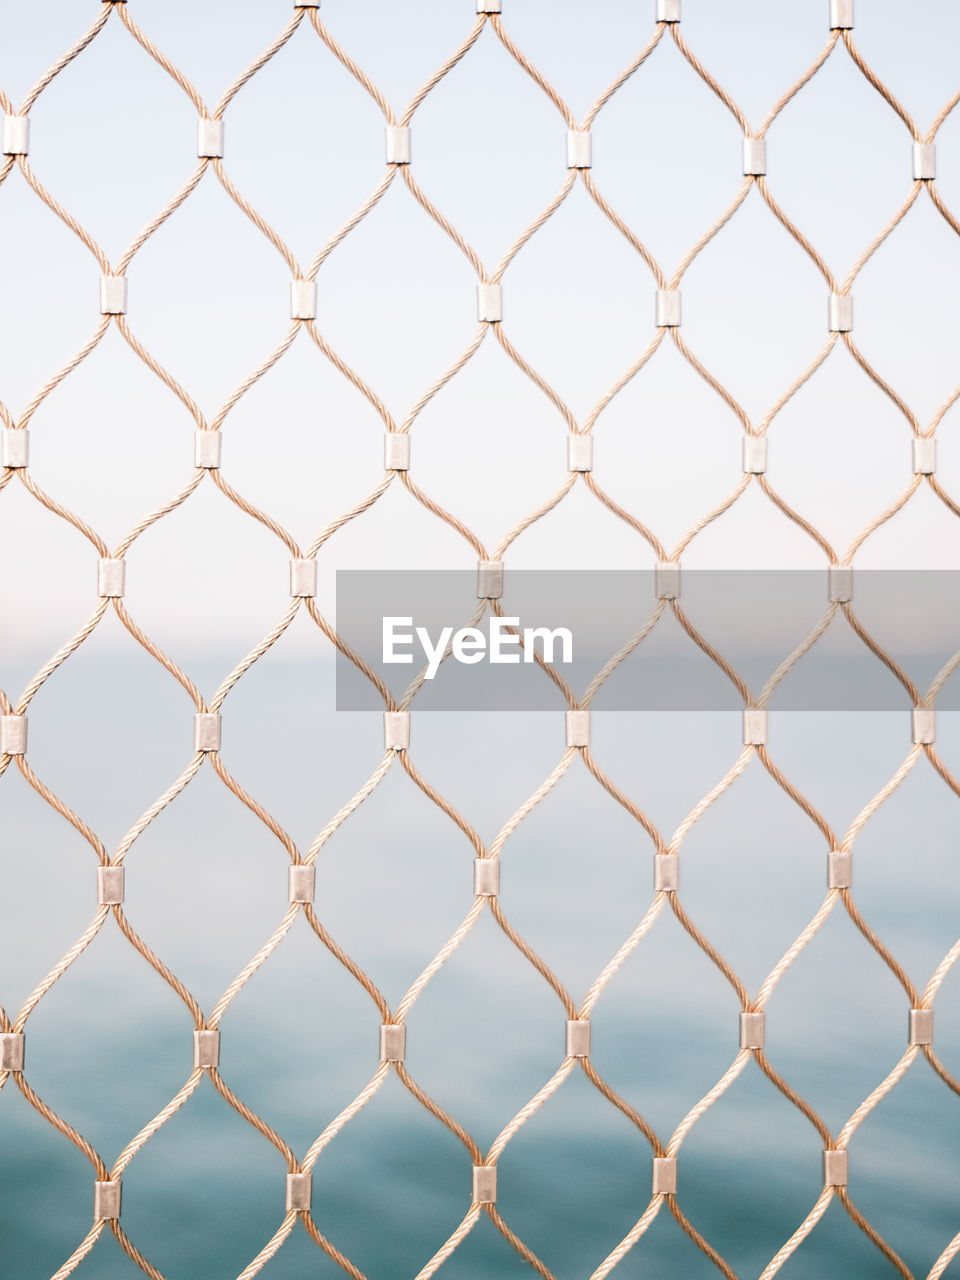 chainlink fence, fence, pattern, mesh, chain-link fencing, net, no people, security, protection, wire mesh, metal, full frame, backgrounds, wire, sky, flooring, day, nature, line, circle